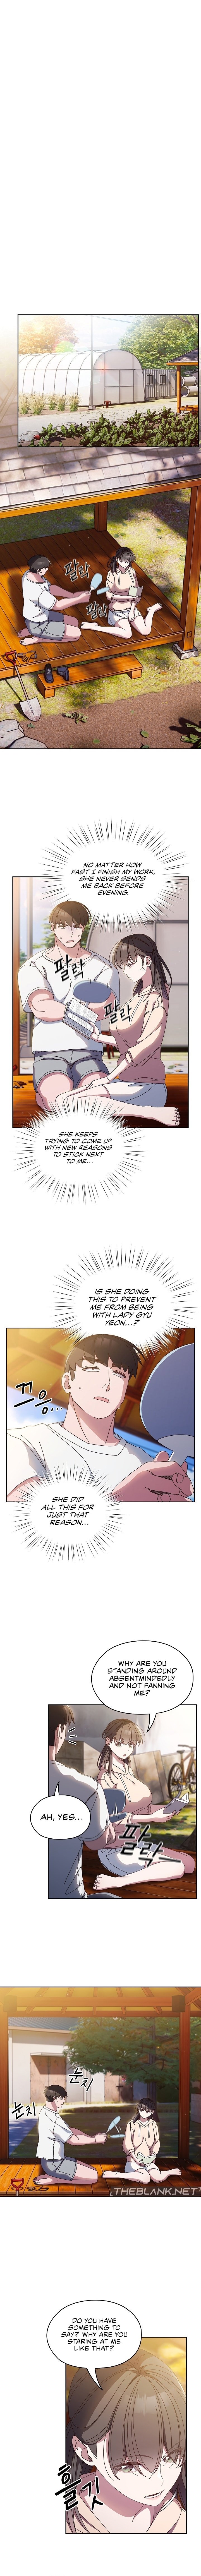 boss-give-me-your-daughter-chap-24-2